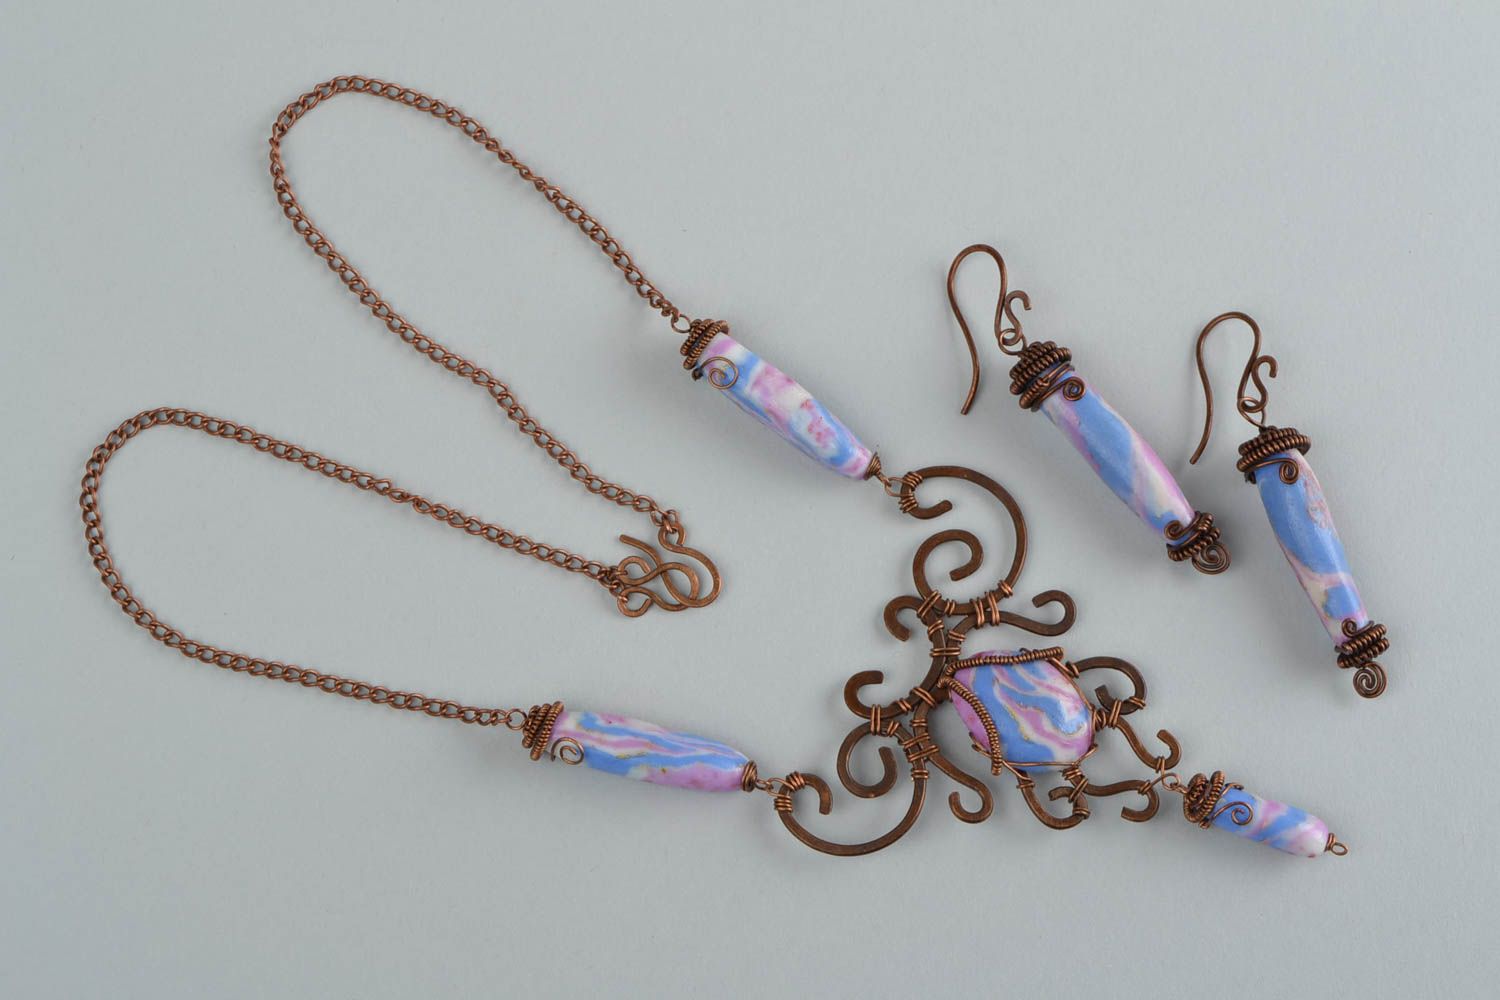 Earrings and pendant made of copper and polymer clay using wire wrap technique photo 3